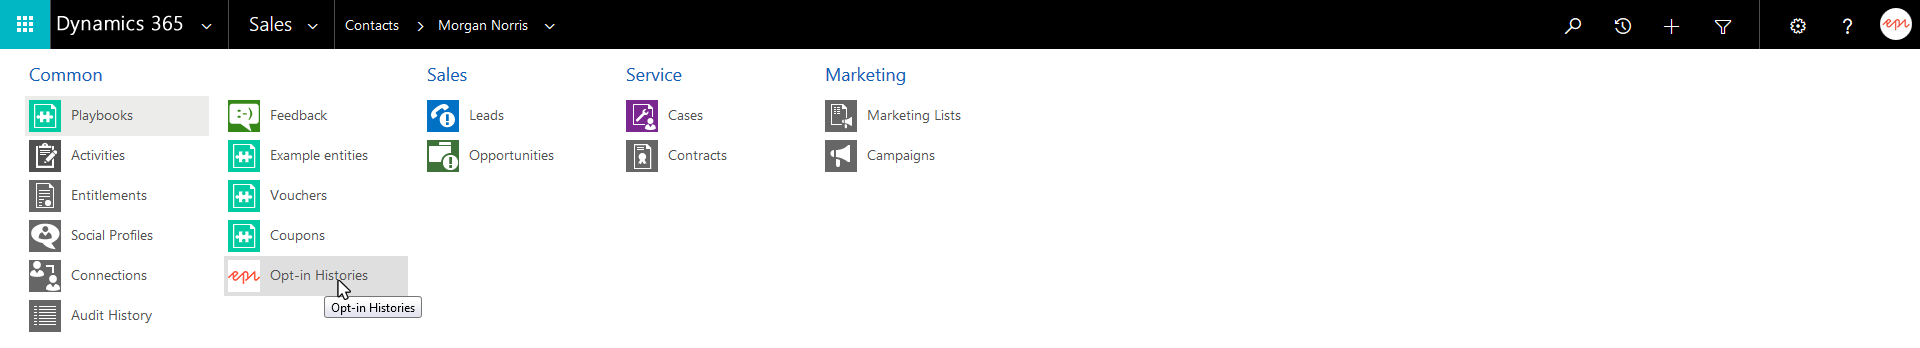 Image: Campaign opt-in history in Microsoft Dynamics menu